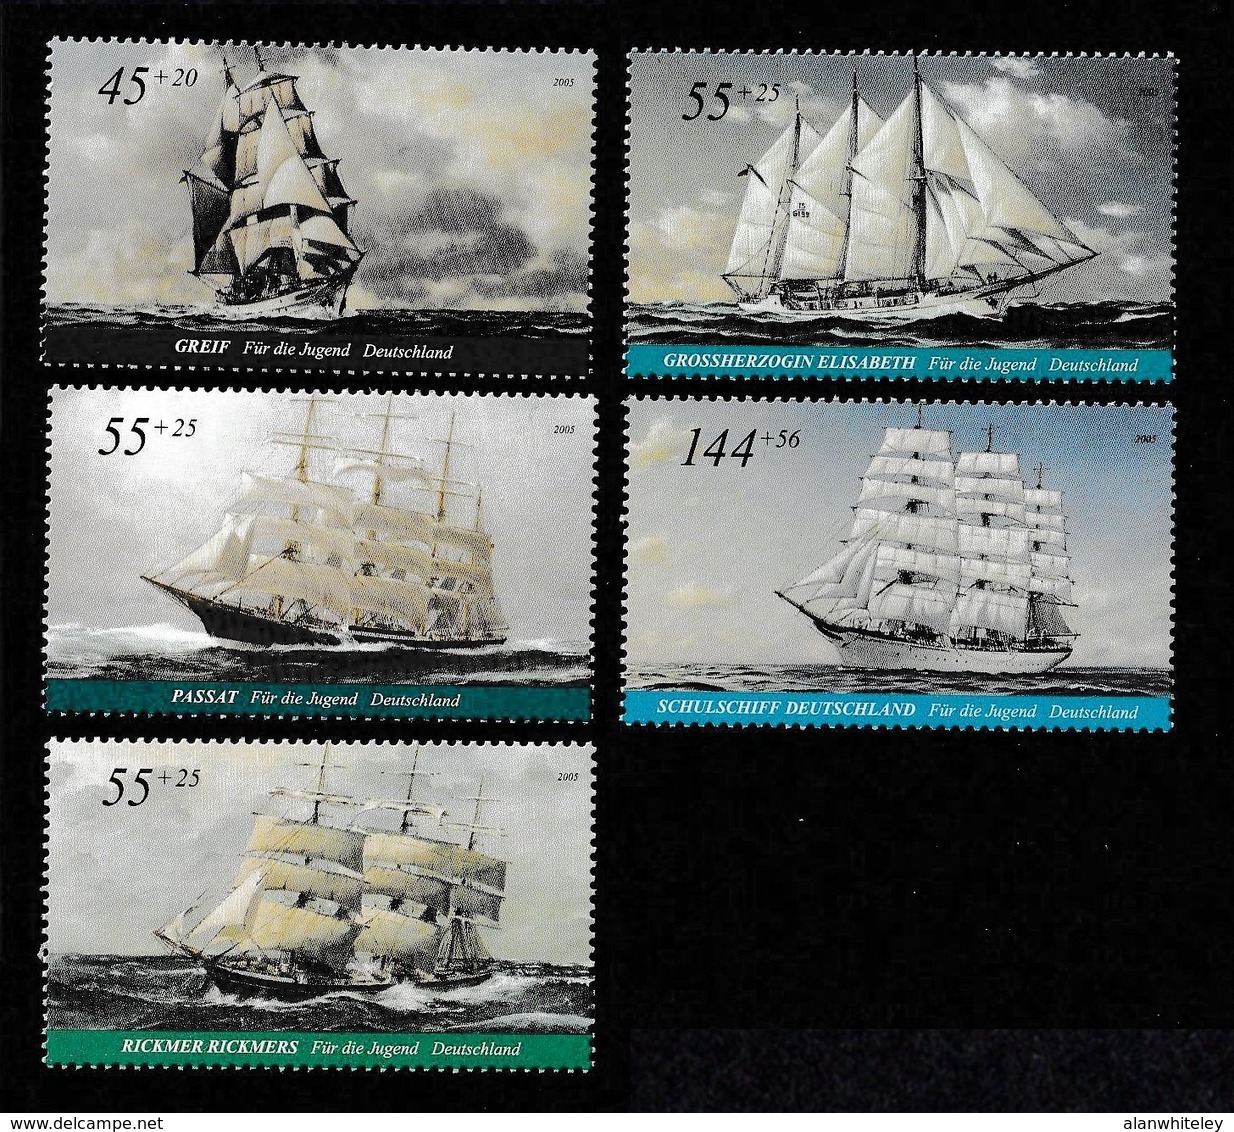 GERMANY 2005 Youth Welfare/Tall Ships: Set Of 5 Stamps UM/MNH - Unused Stamps